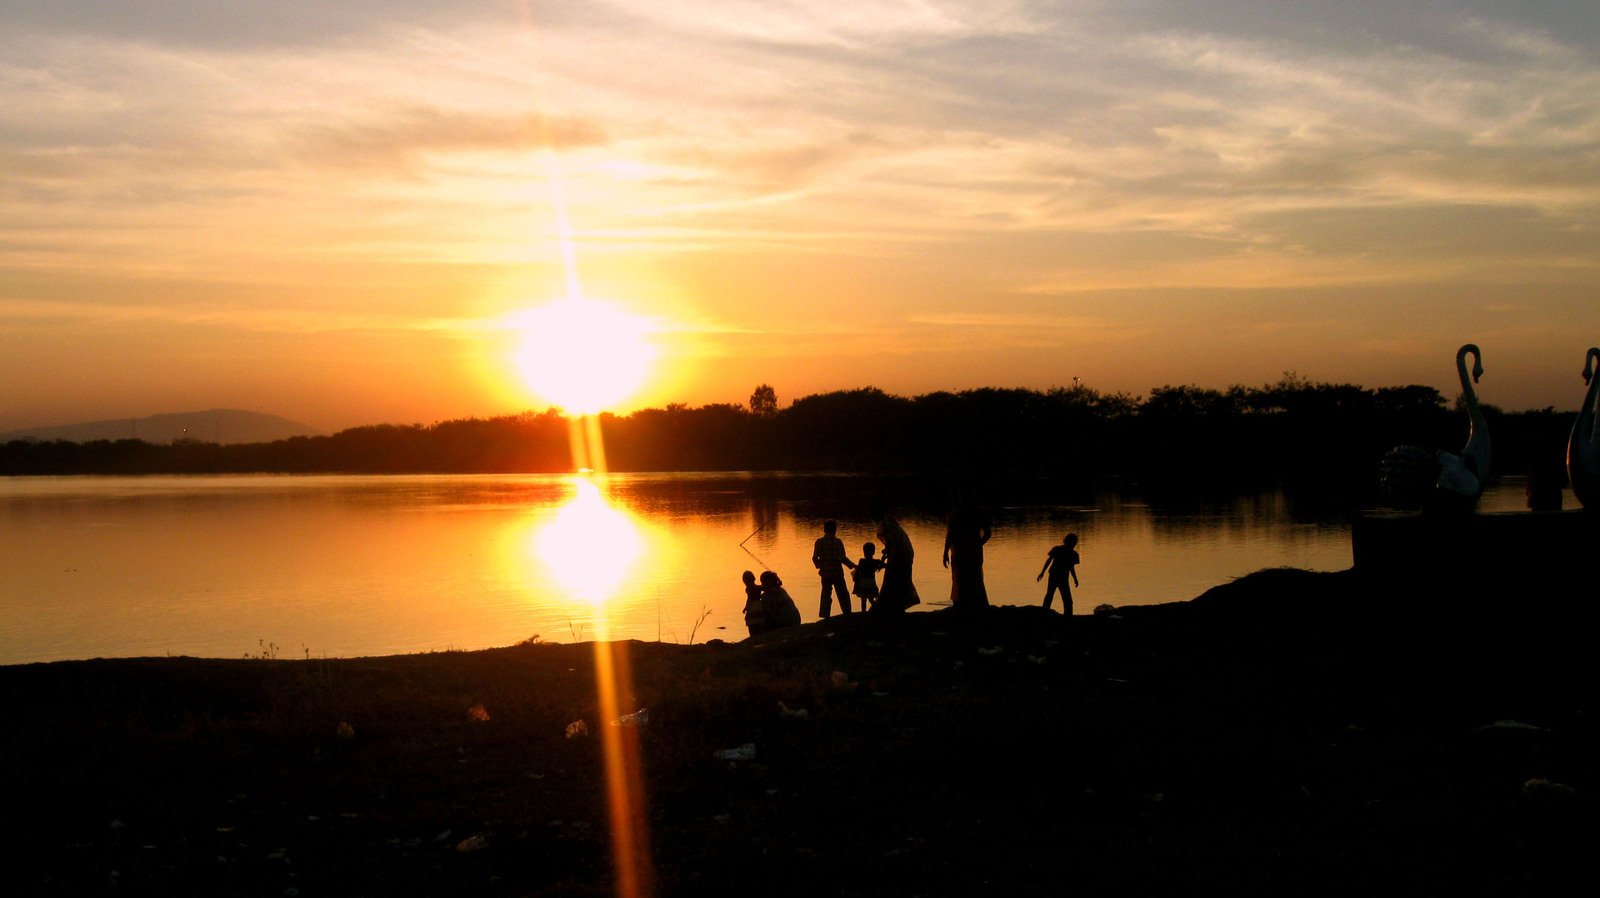 the sun is setting over a lake as people walk near